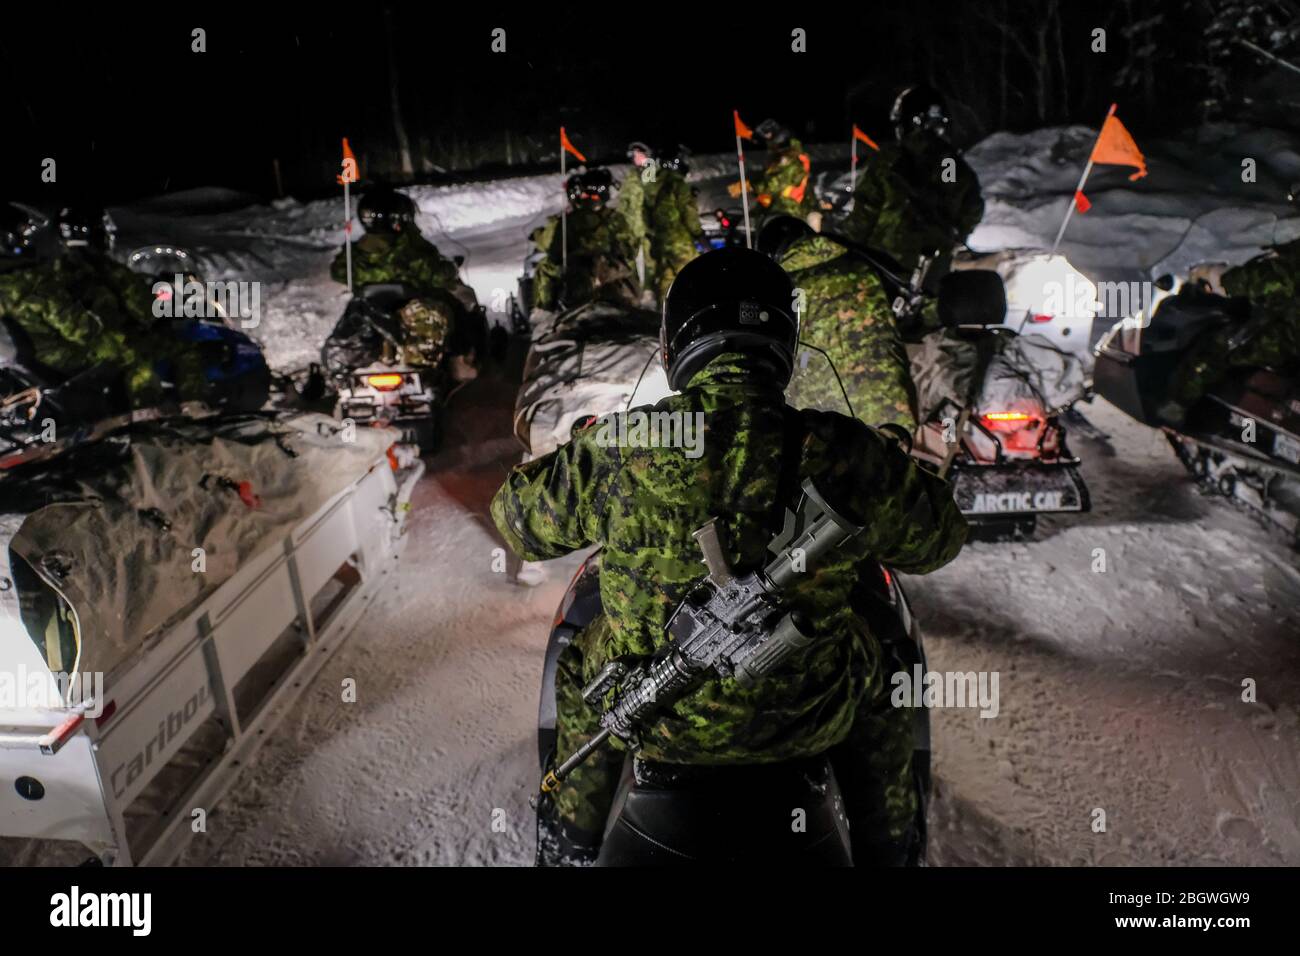 SAGUENAY, CANADA - JANUARY 15: soldiers in snowmobiles during a Franco-Canadian military exercise, Quebec, Saguenay, Canada on January 15, 2017 in Sag Stock Photo